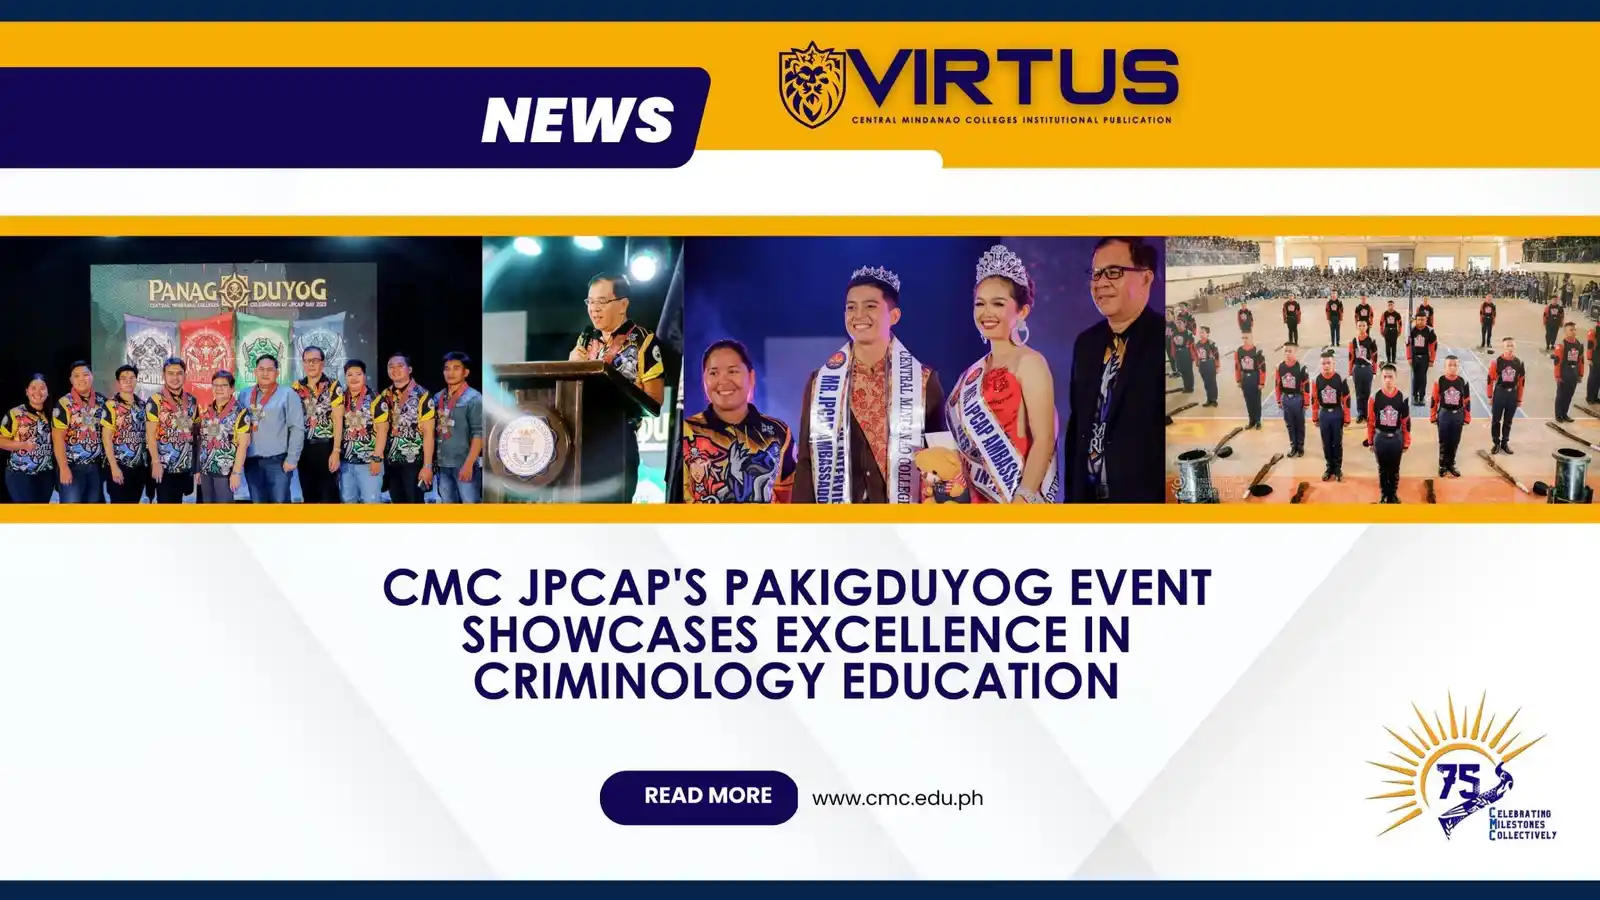 CMC JPCAP’s Panagduyog Event Showcases Excellence in Criminology Education